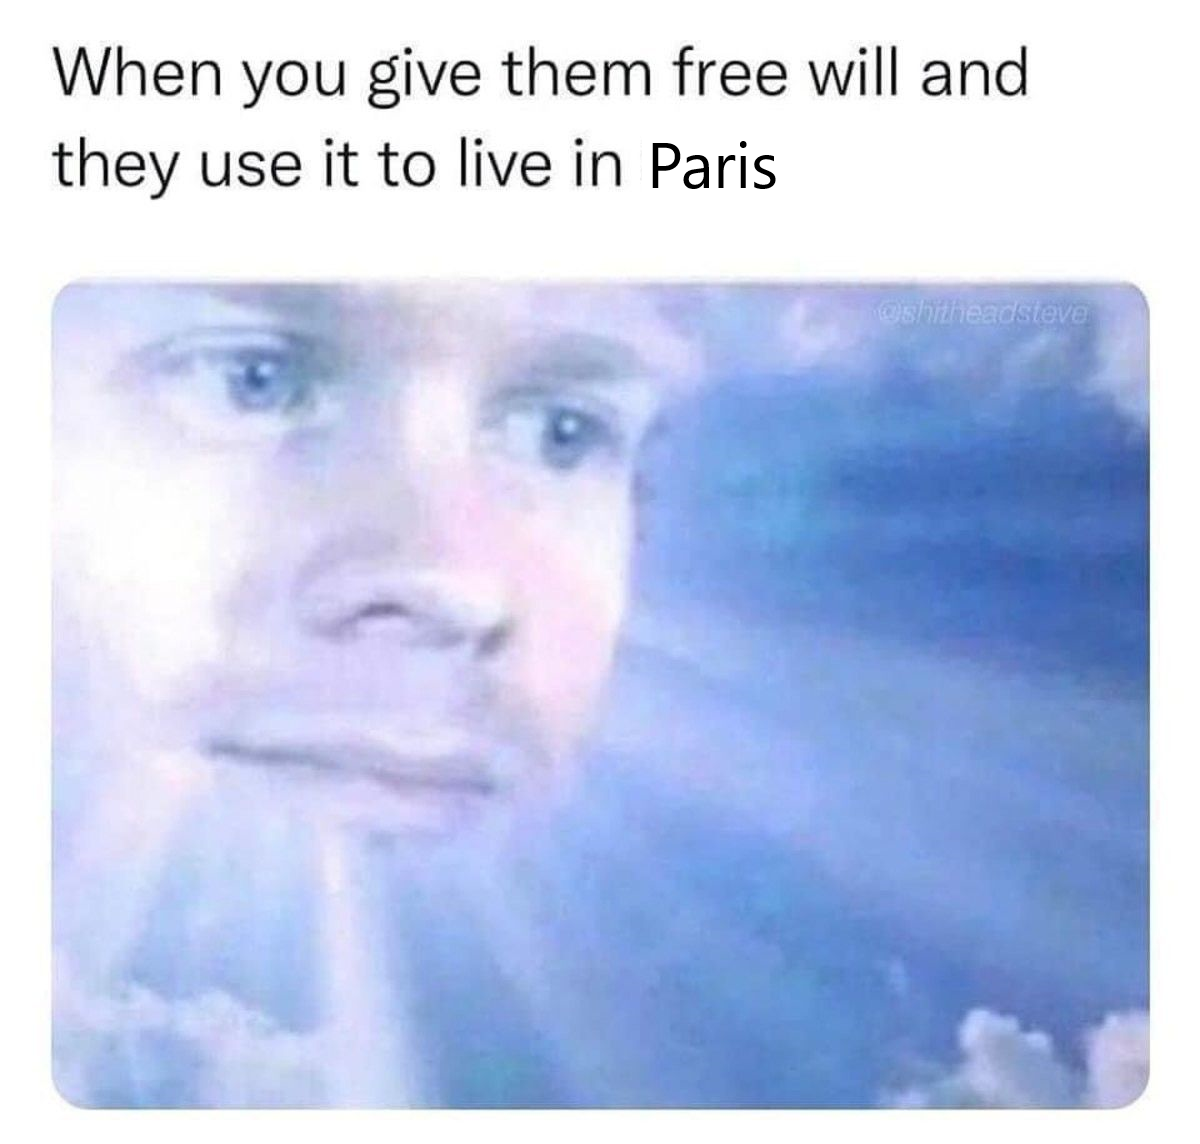 Even worse, they could be french